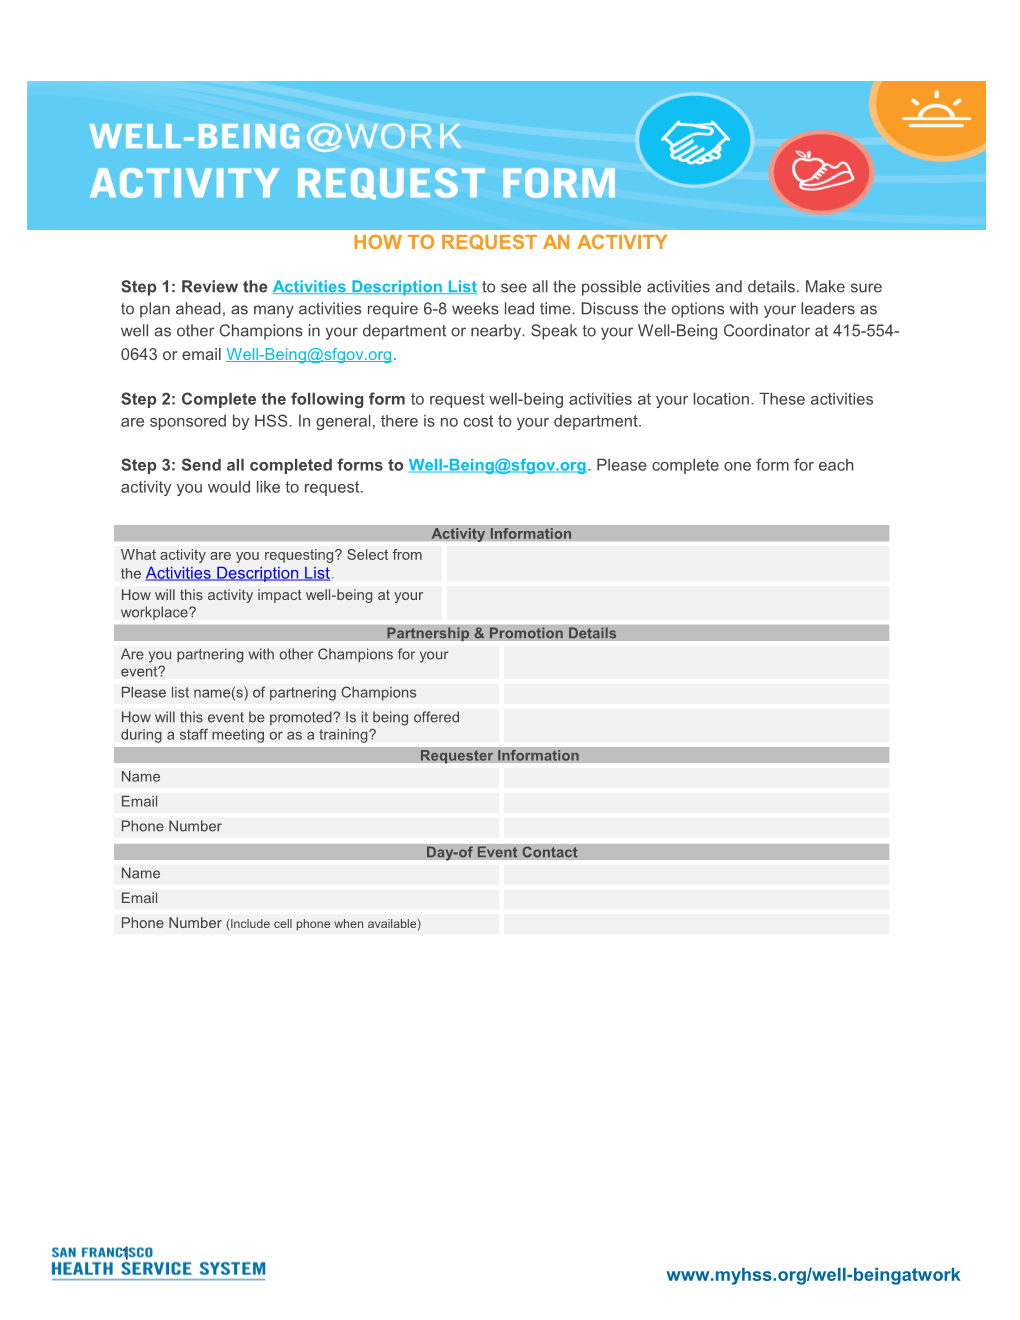 How to Request an Activity